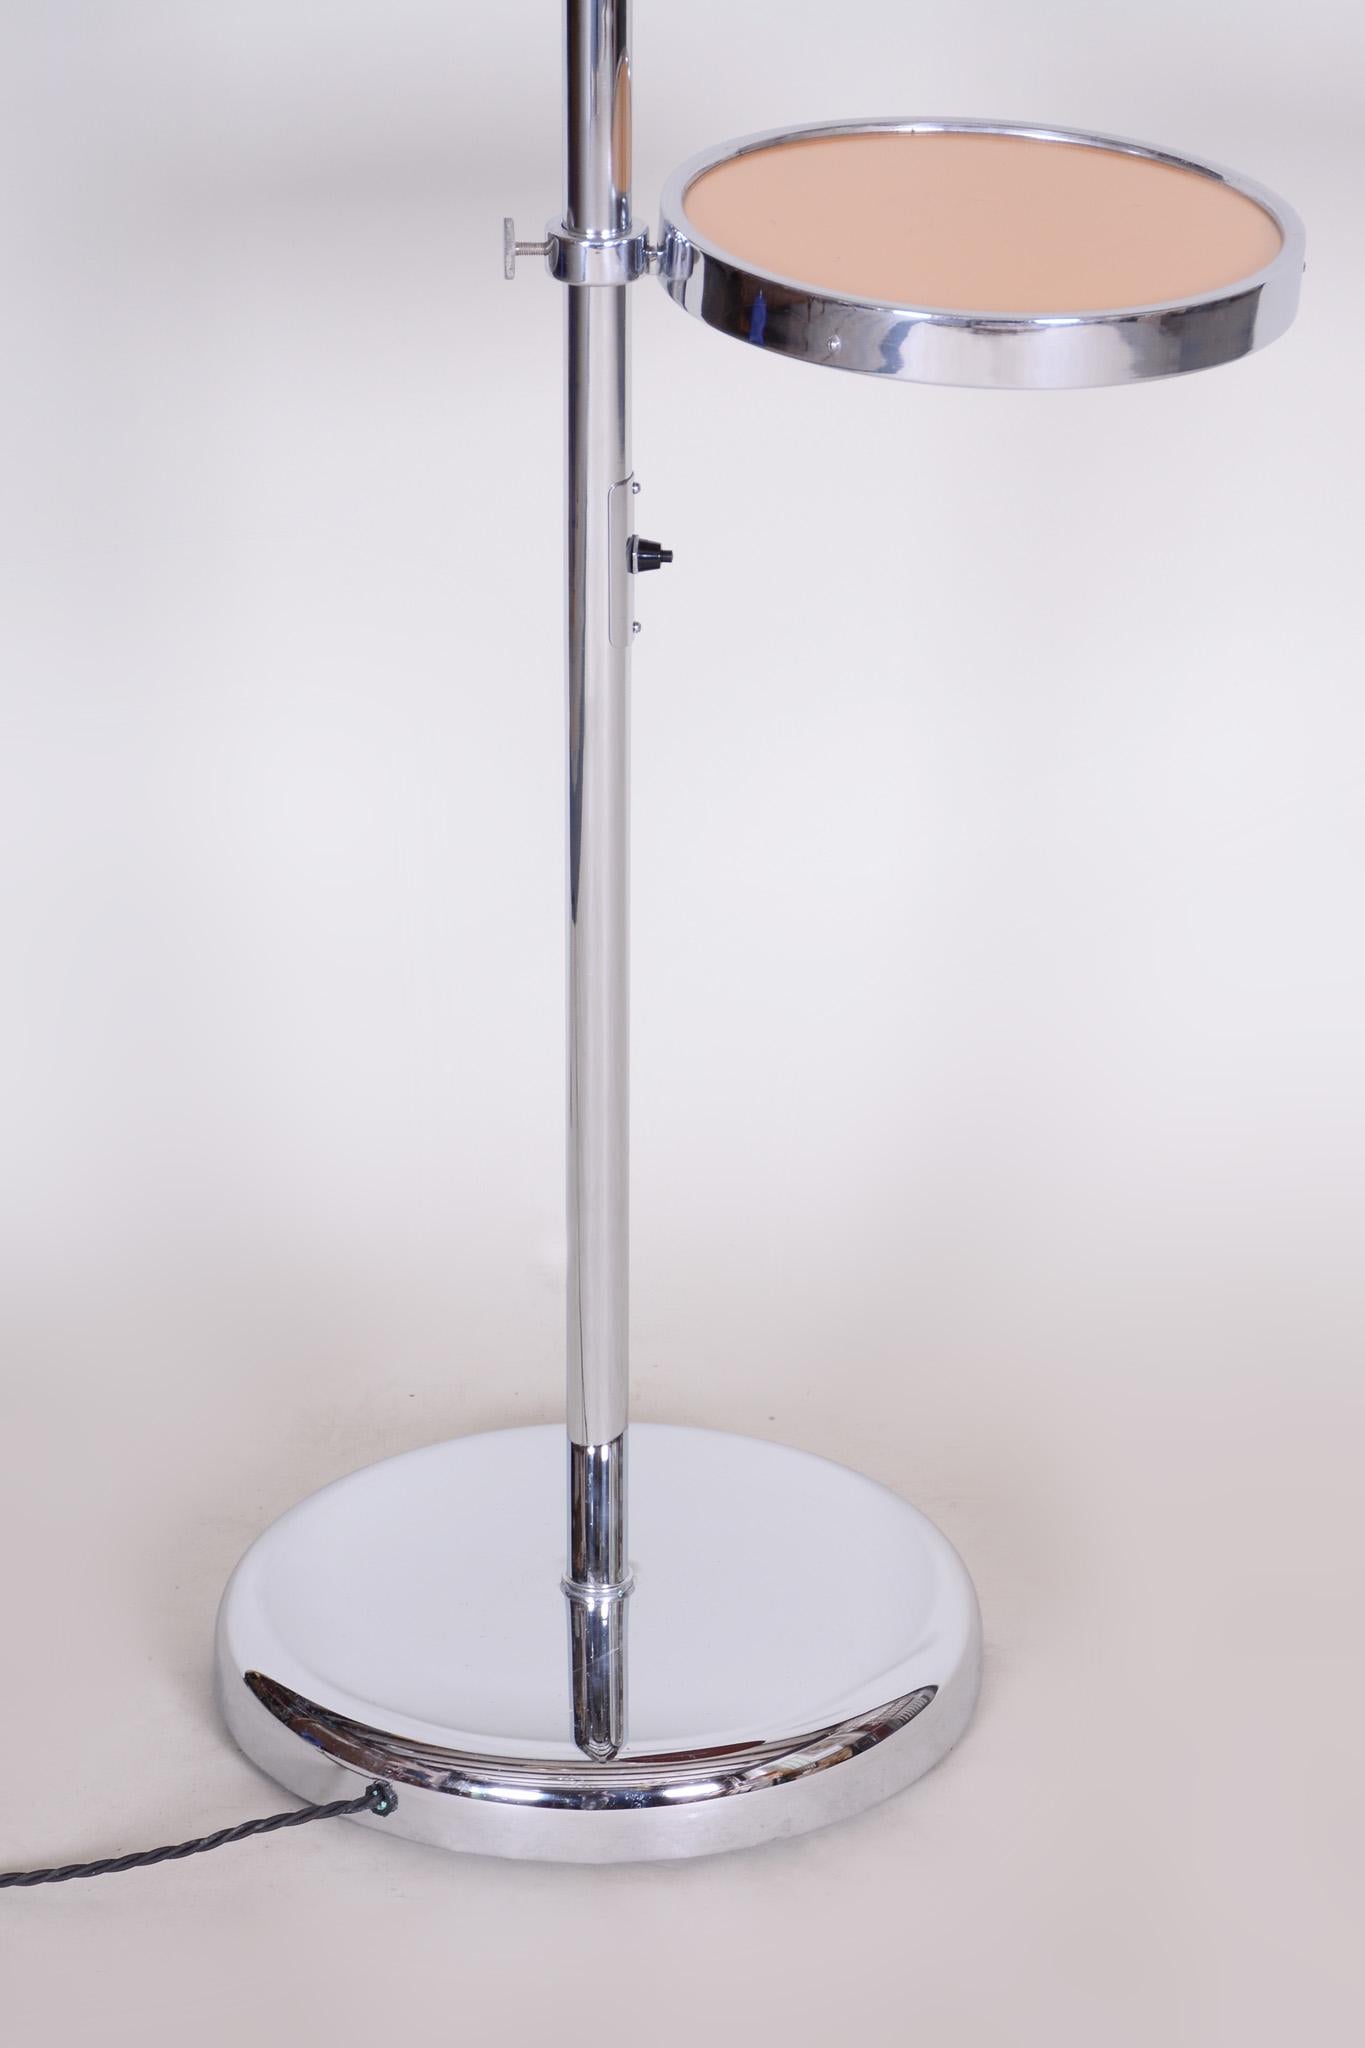 Bauhaus Early 20th Century Chrome Floor Lamp, Milk Glass, New Electrification, 1930s For Sale